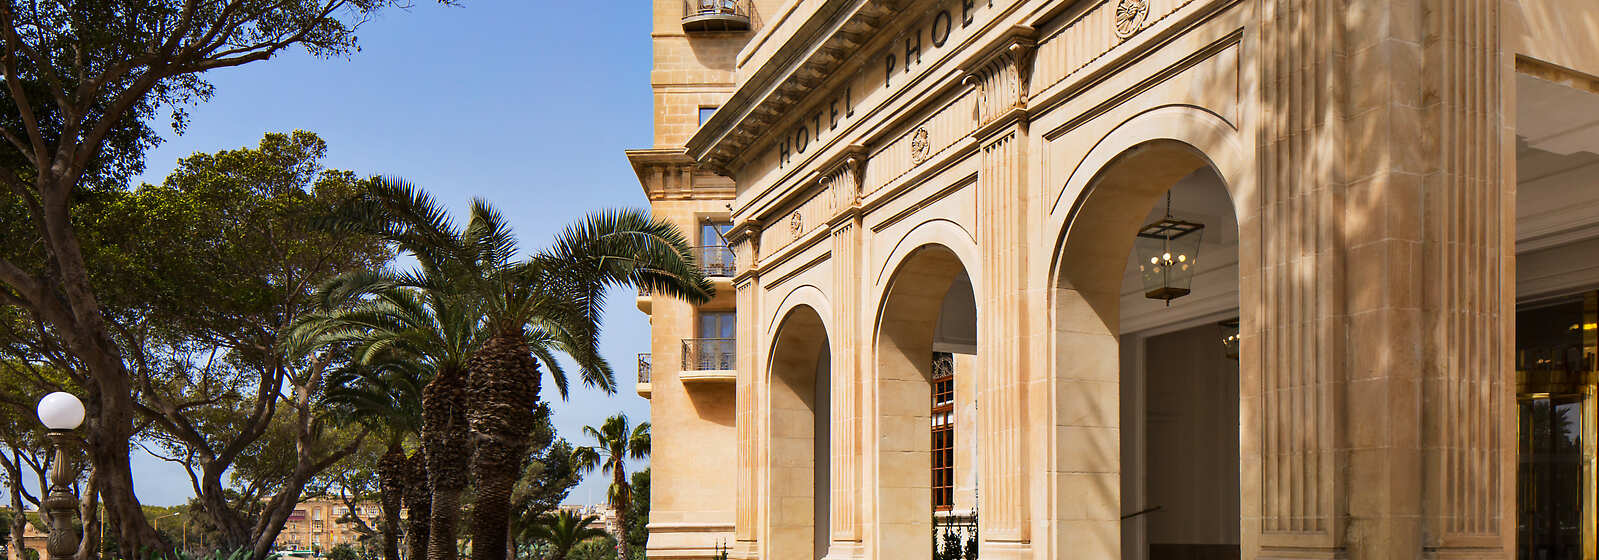 If you’re dreaming of an exquisite hotel experience in the finest 5 star luxury hotel in Valletta, look no further than The Phoenicia Malta.